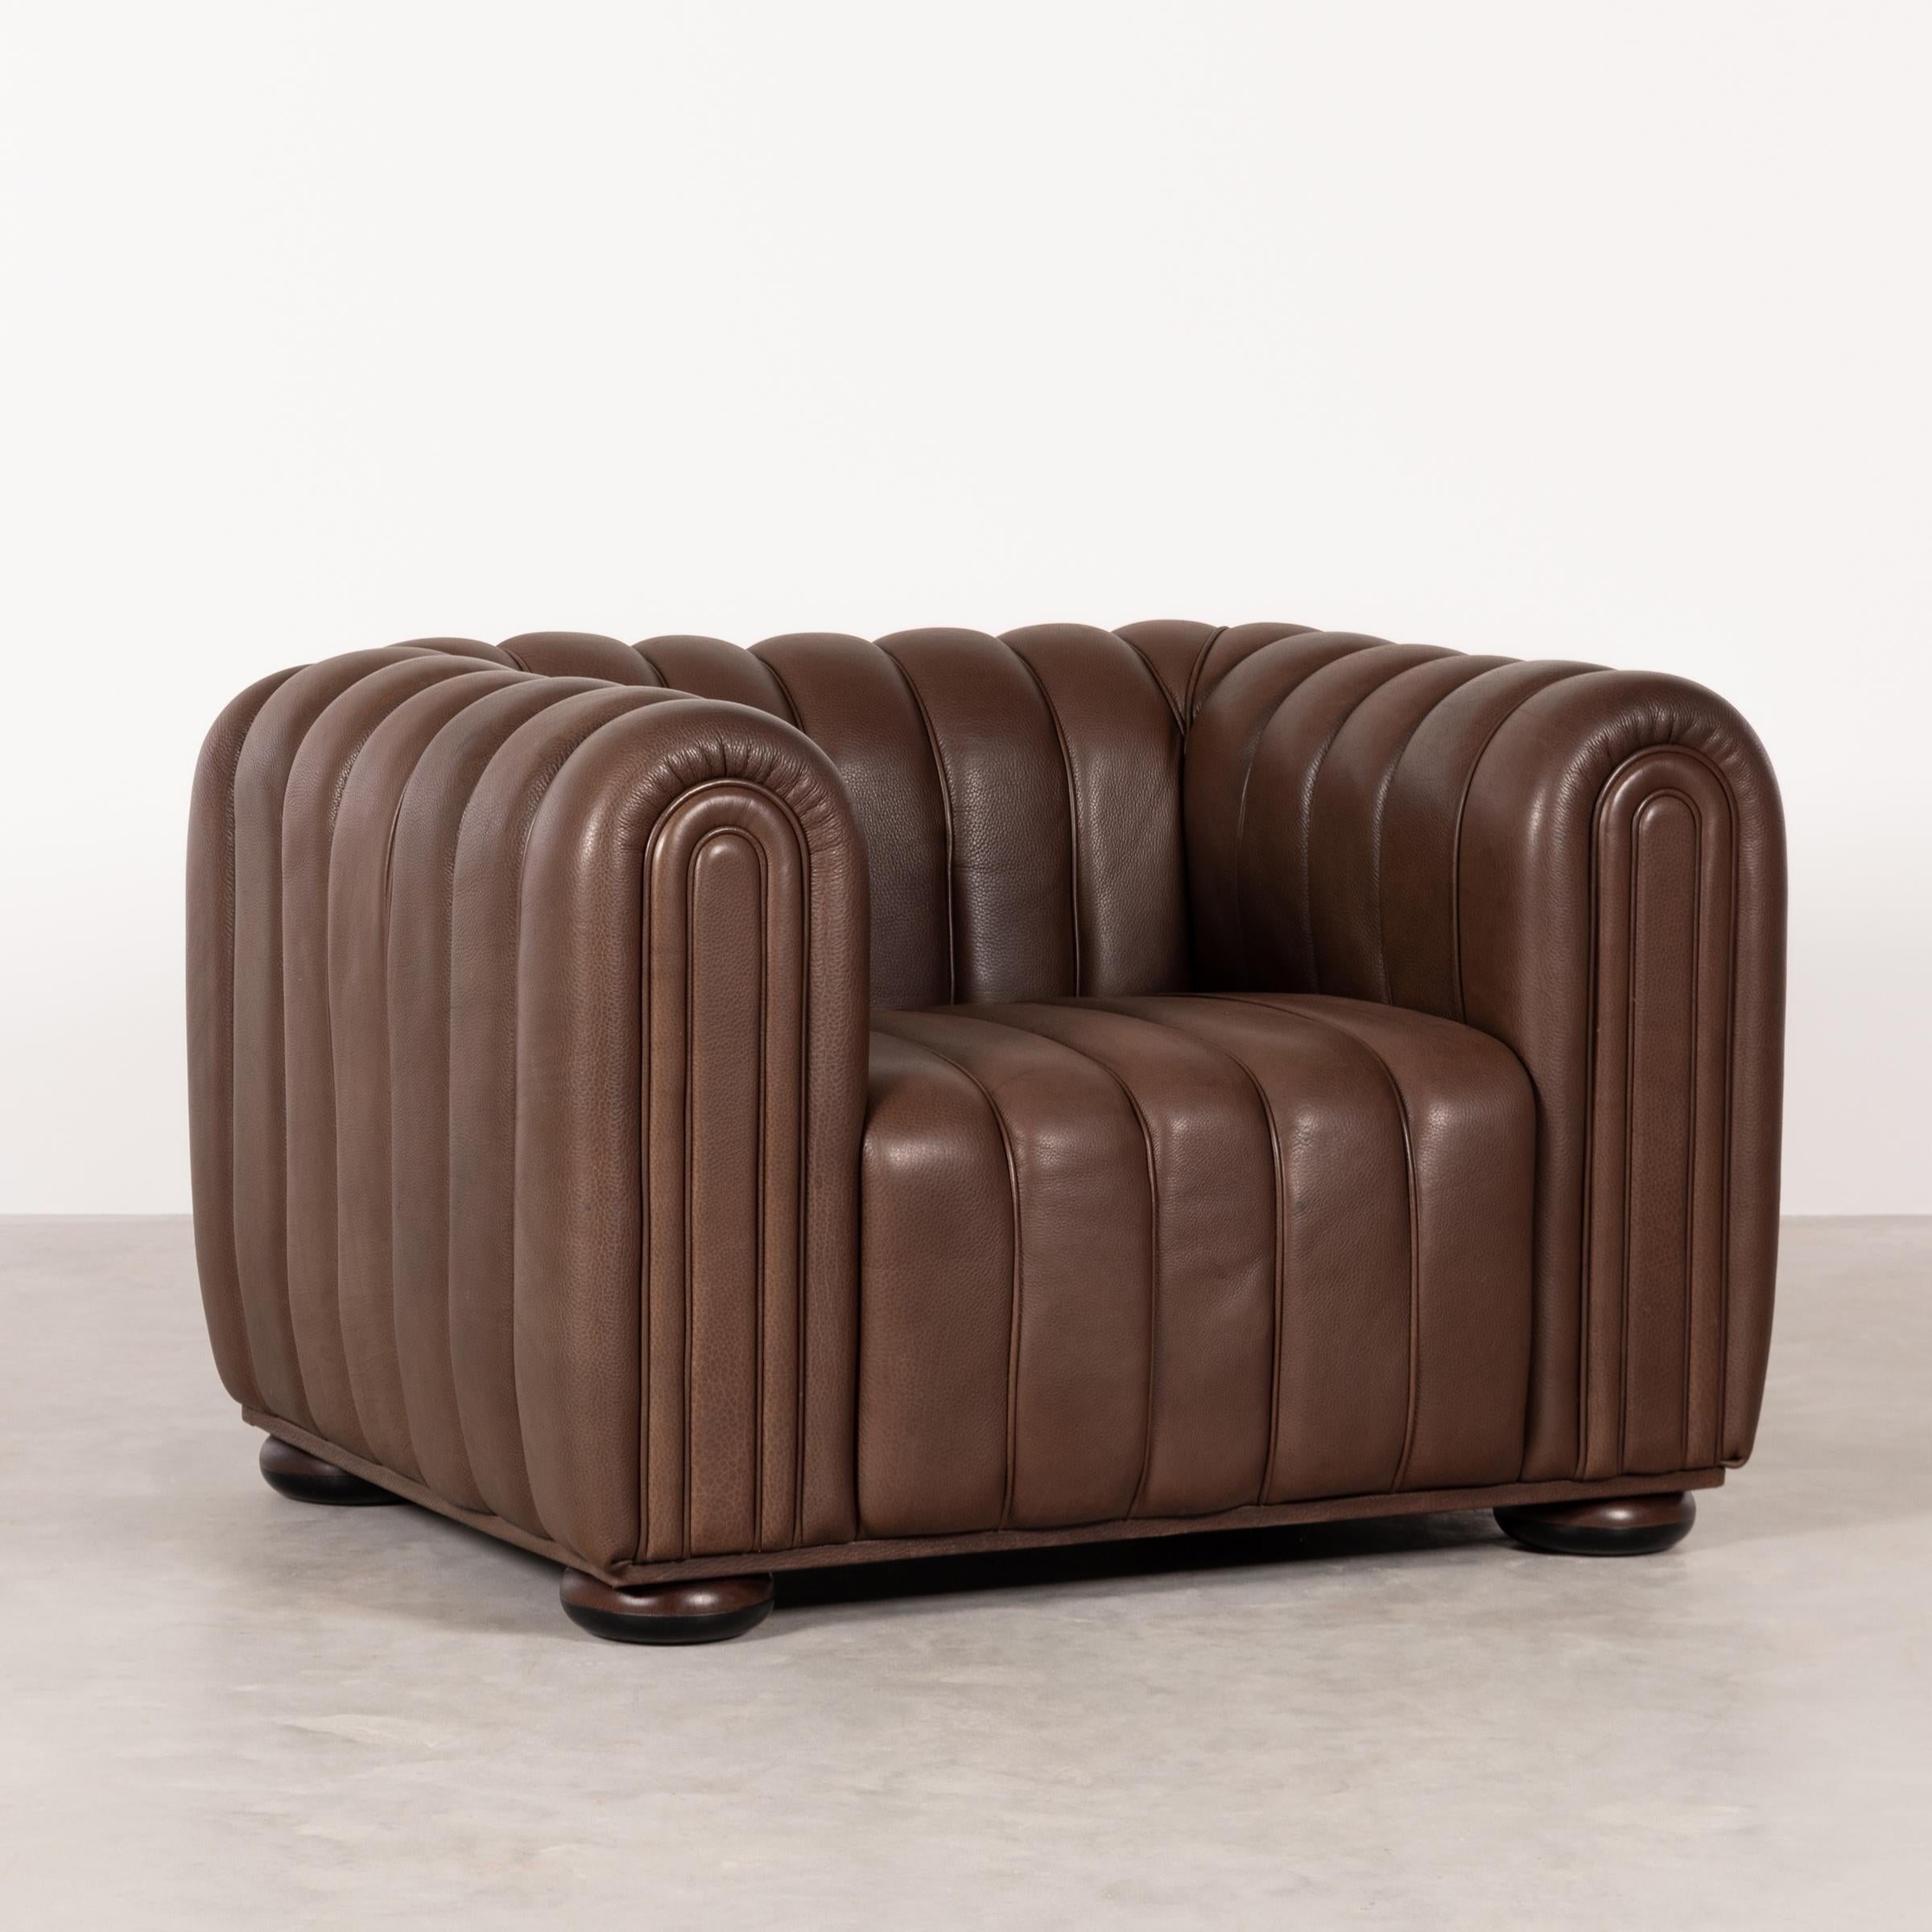 Josef Hoffmann club chair model 1910 in brown leather for Wittmann. Dark brown leather with light patina and wooden disc-shaped legs. All in good original condition with light cosmetic wear and signed with manufacturer label.